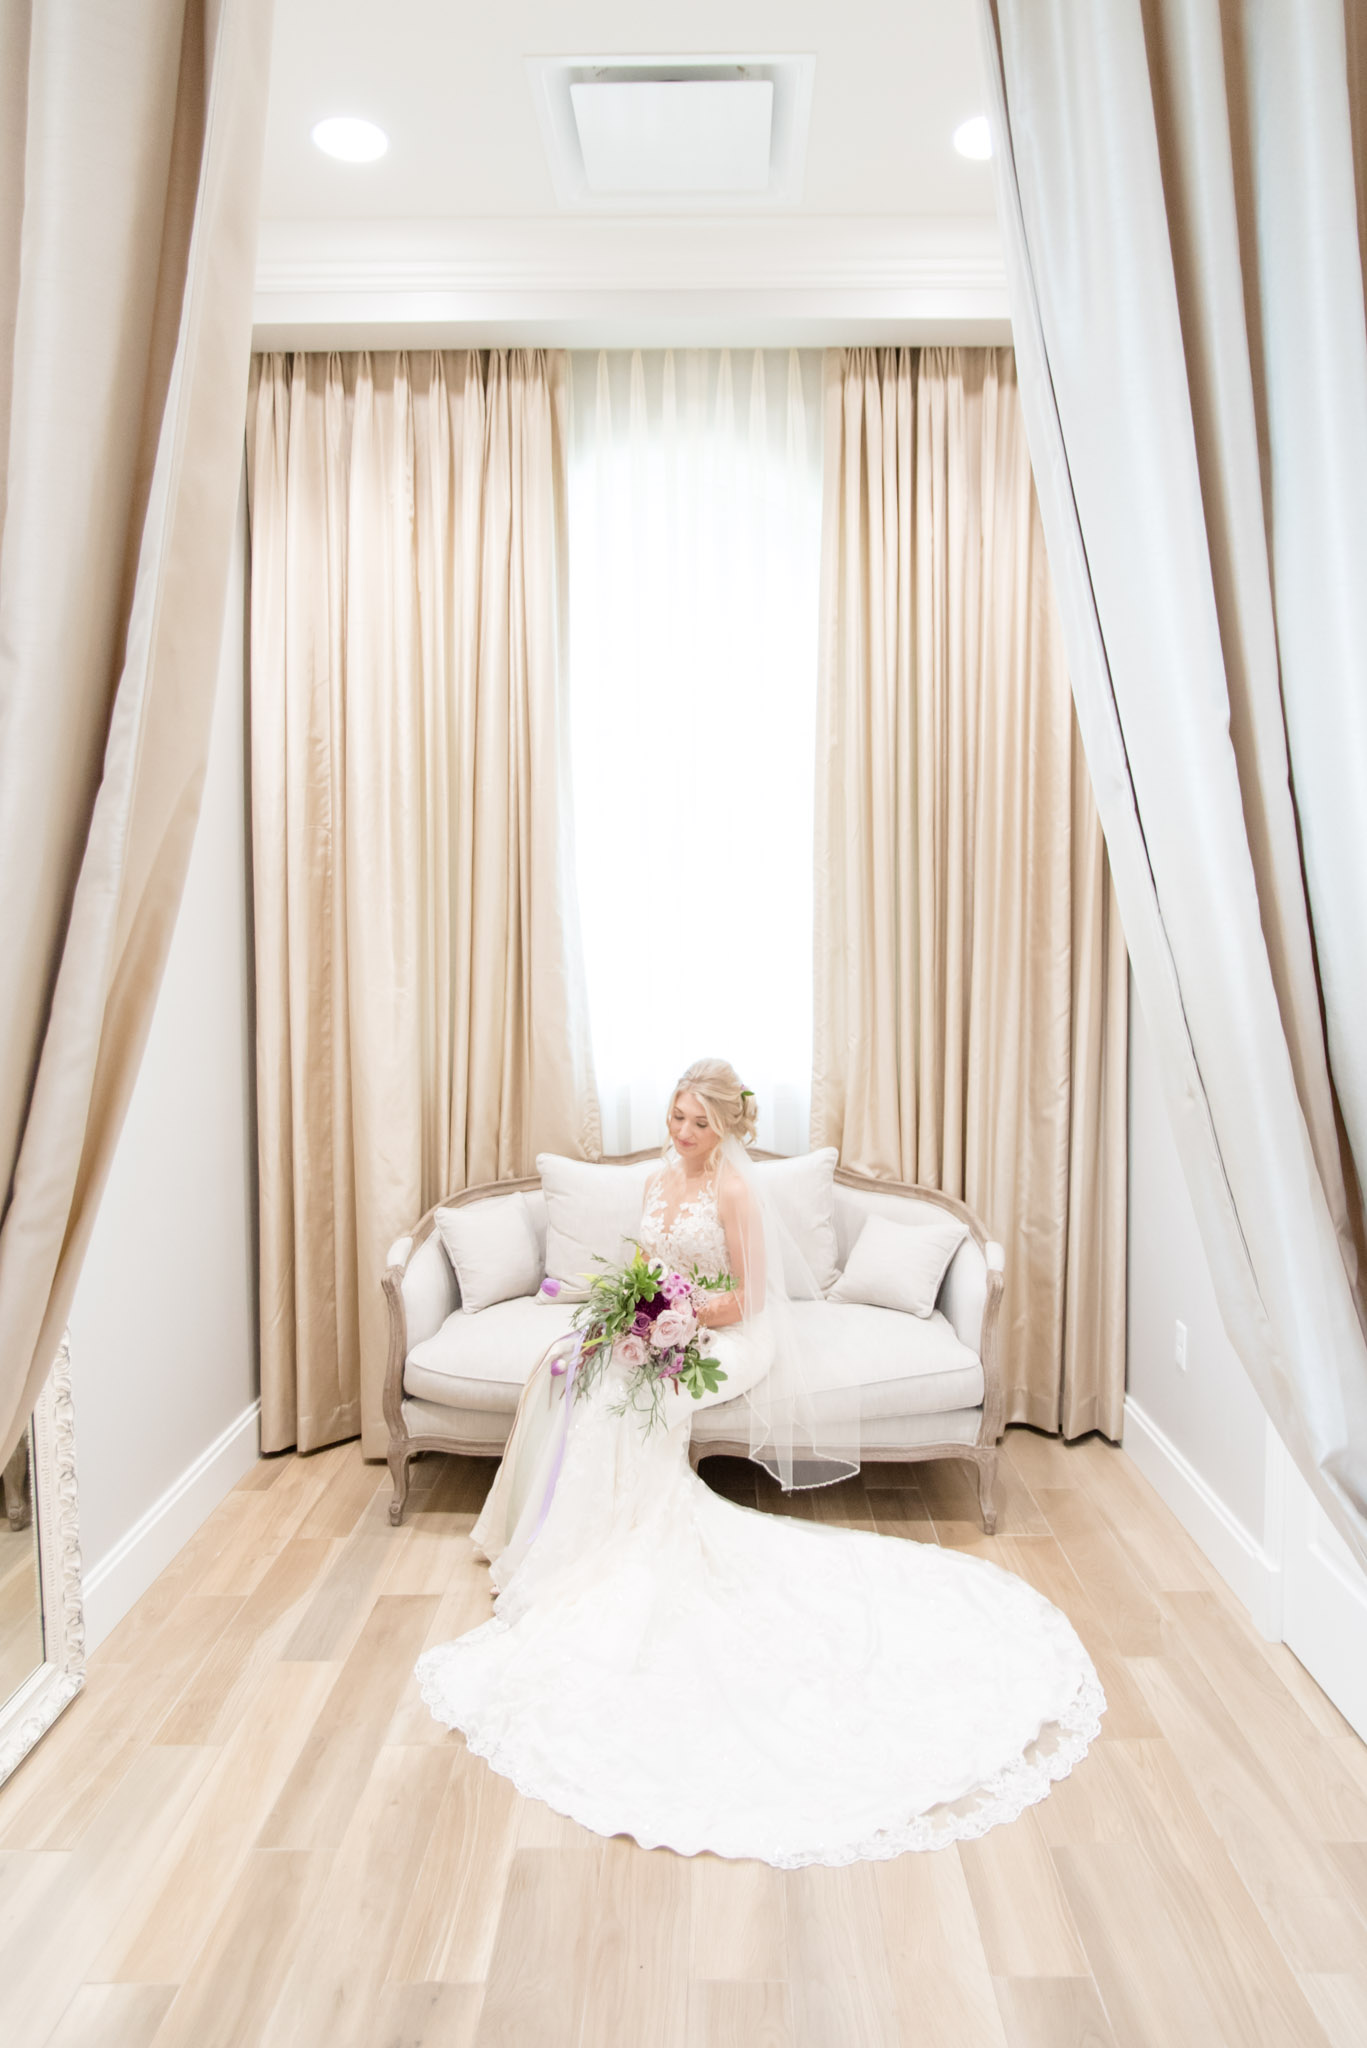 Bride looks down while sitting on couch.